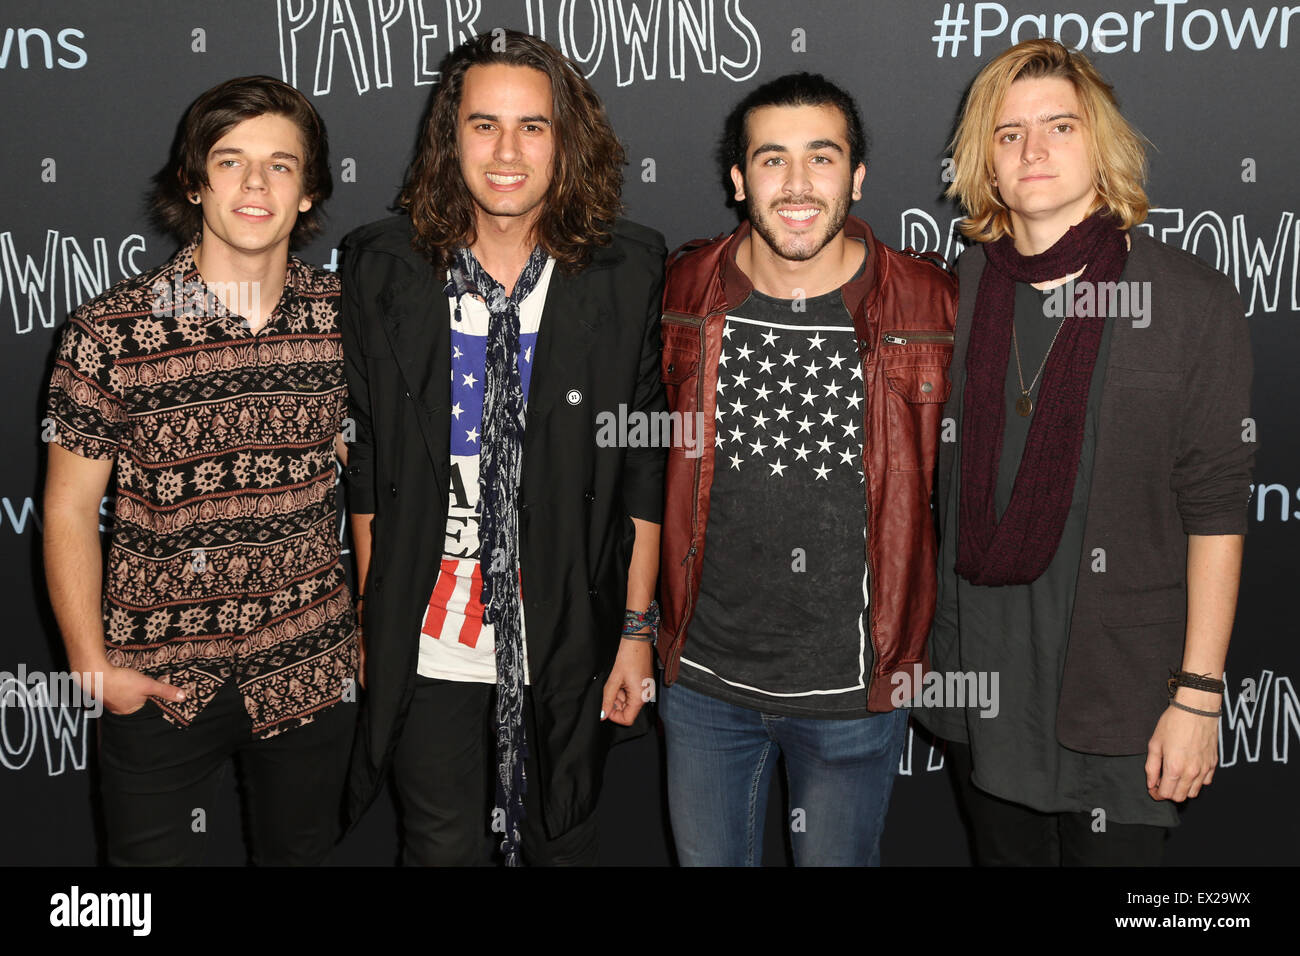 Sydney, Australia. 5 July 2015. Australian pop-rock band from Sydney,  'Little Sea', L-R: Oliver Kirby, Dylan Clark, Leighton Cauchi and Andrew  Butler arrive on the red carpet at the Australian Premiere of